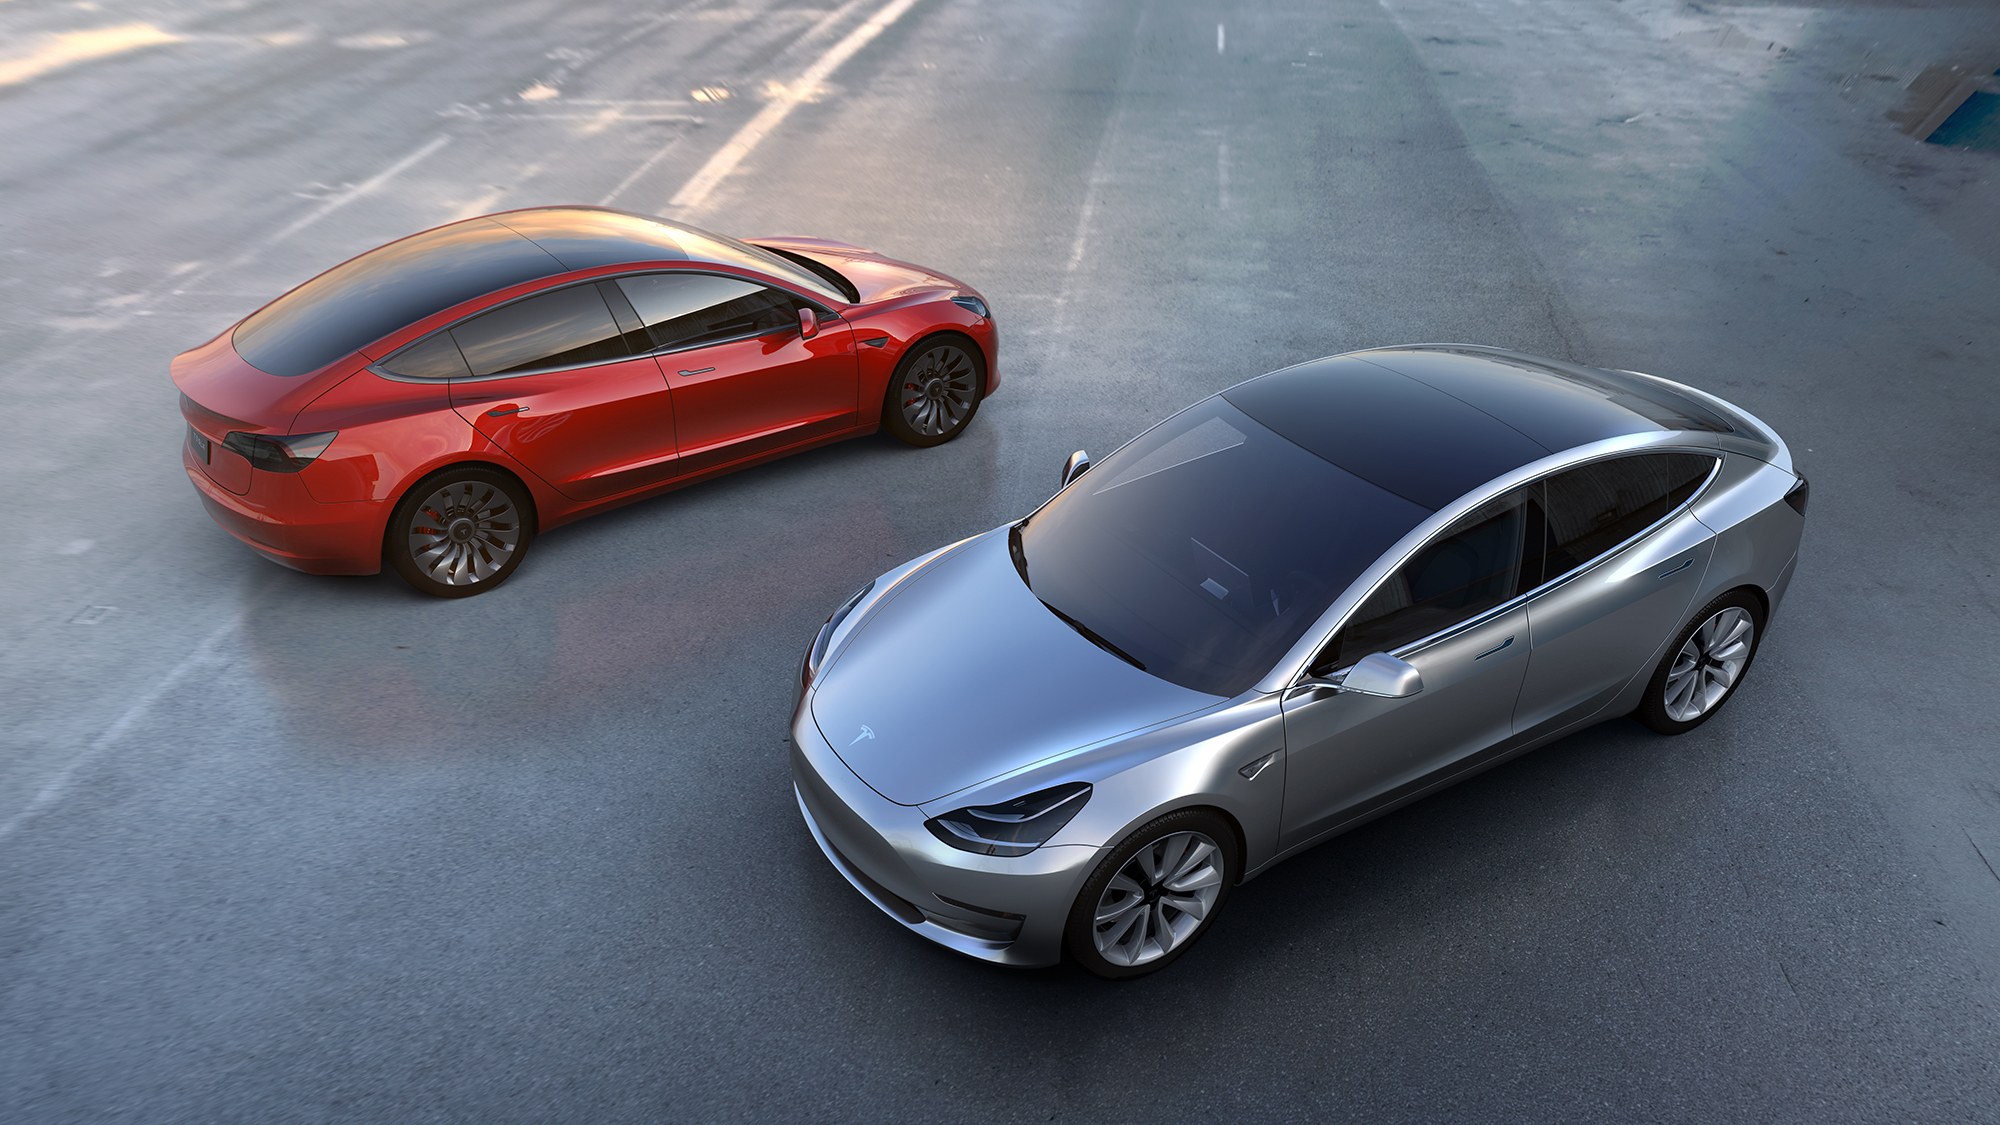 Meet Tesla's Model 3, Its Long-Awaited Car for the Masses | WIRED